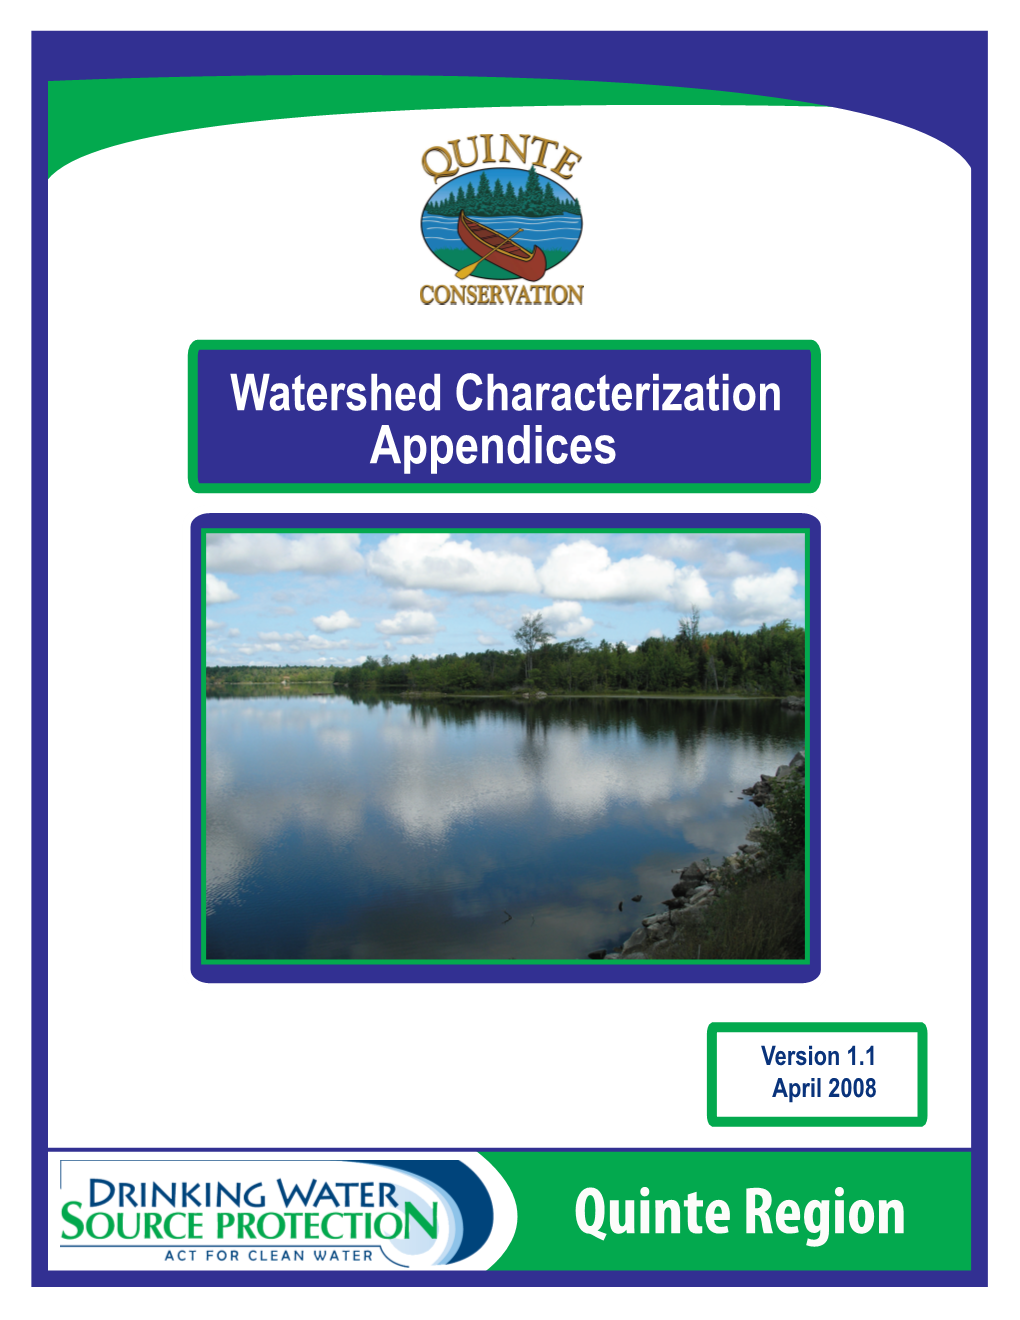 Watershed Characterization Appendices